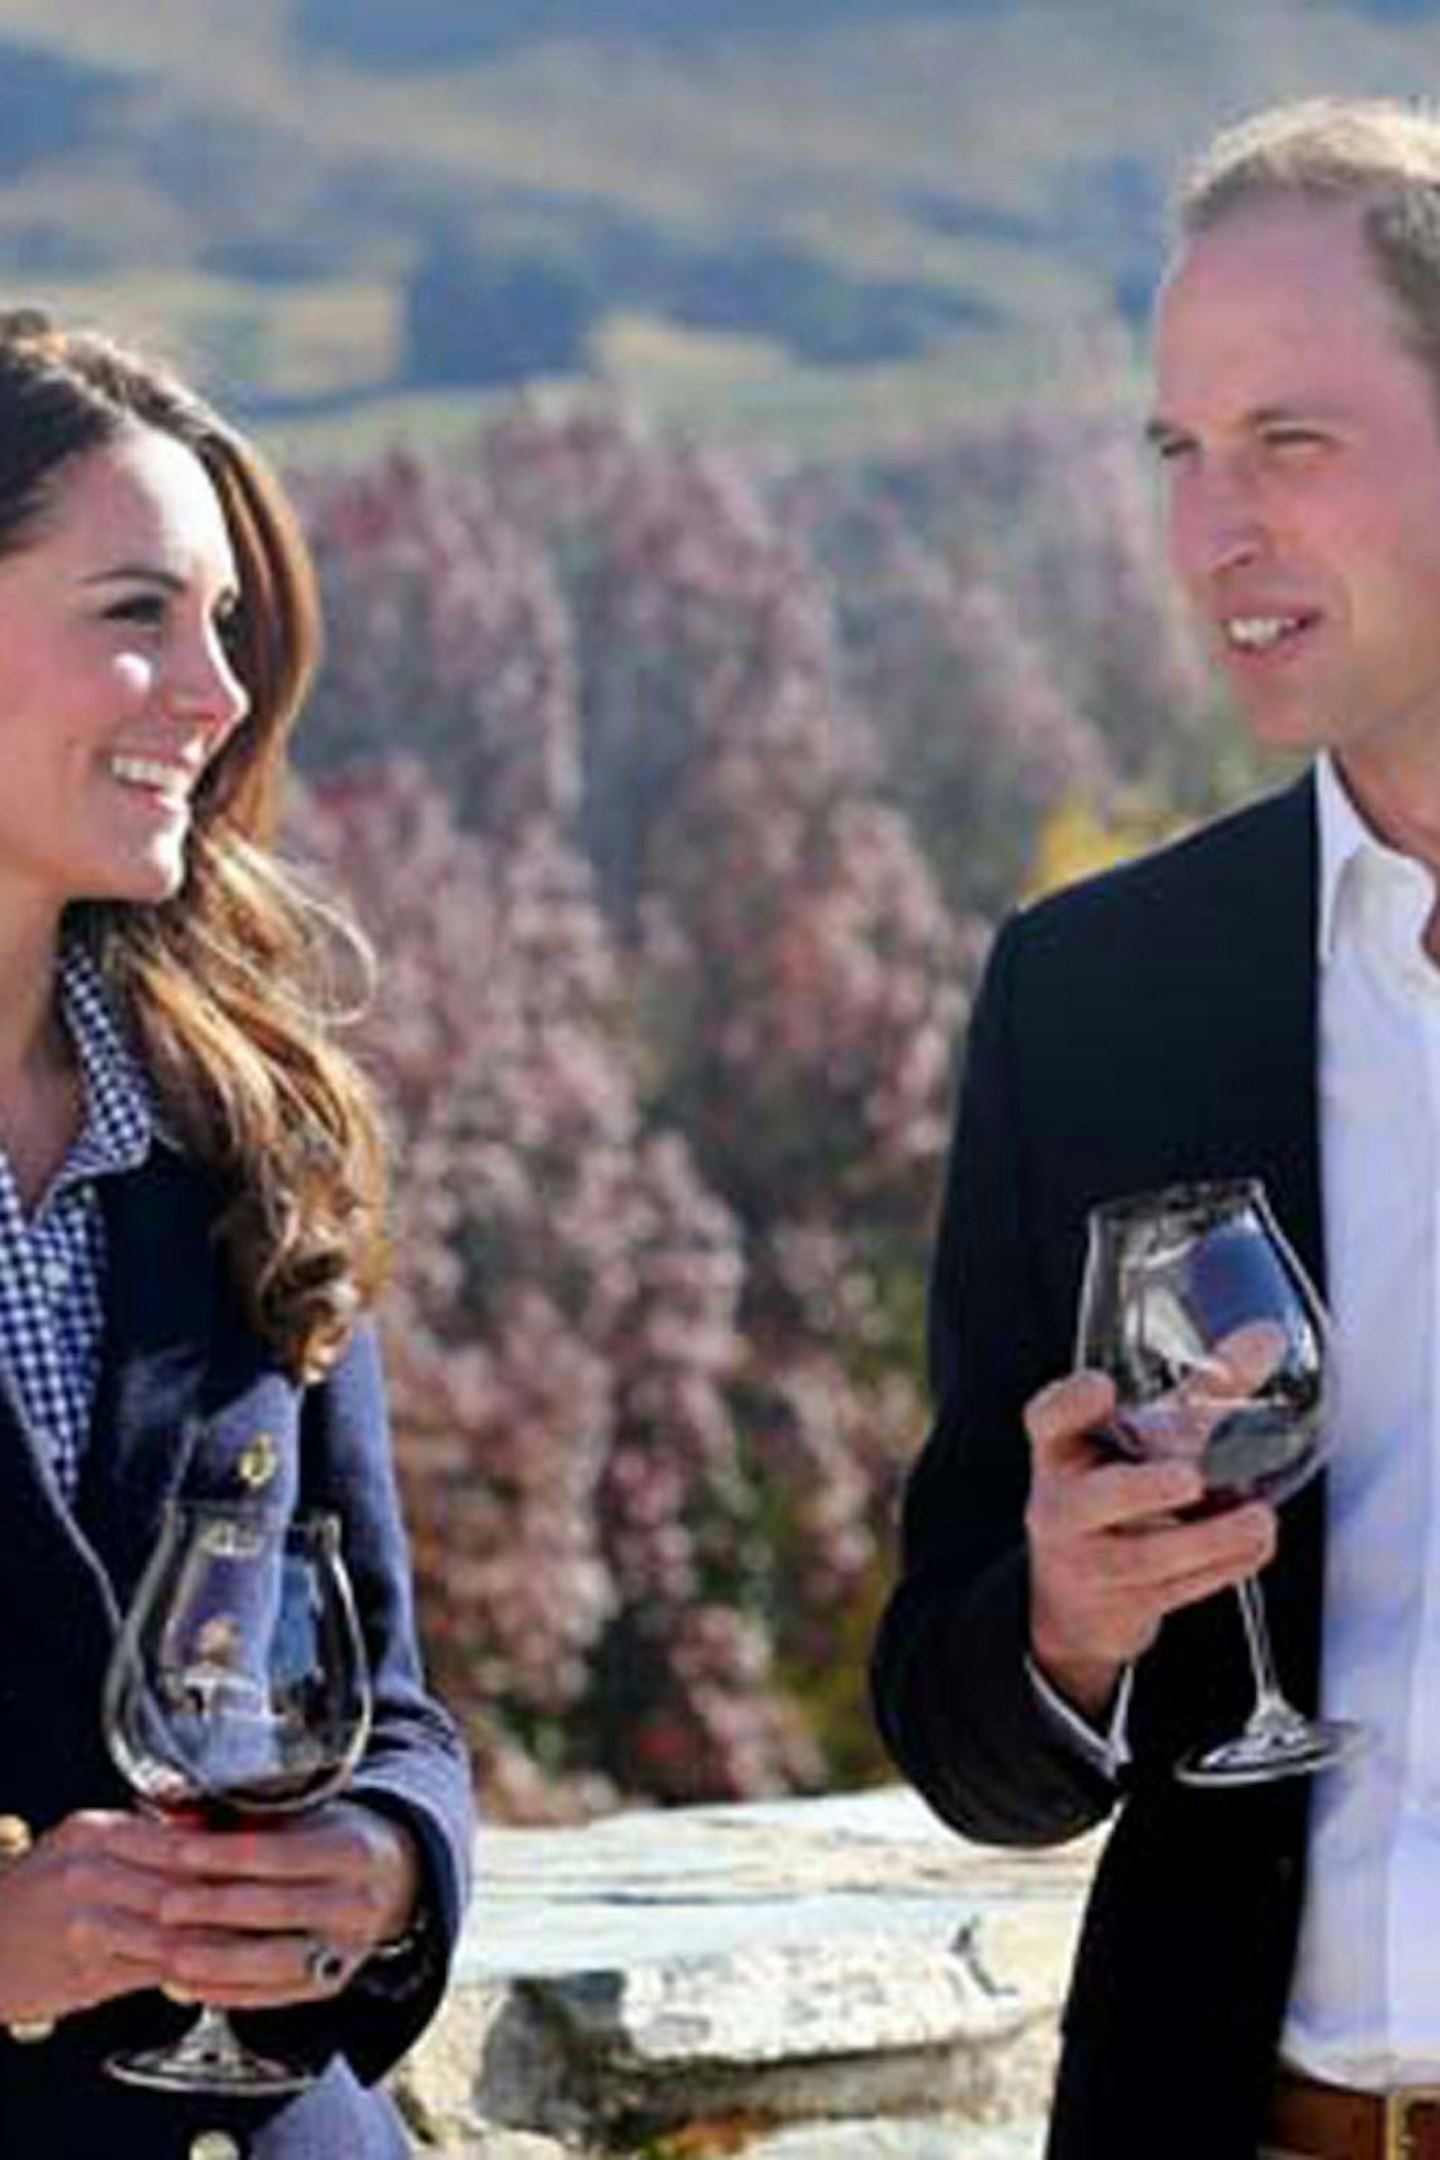 59-58. The couple go wine-tasting at the Amisfield winery in Queenstown, New Zealand